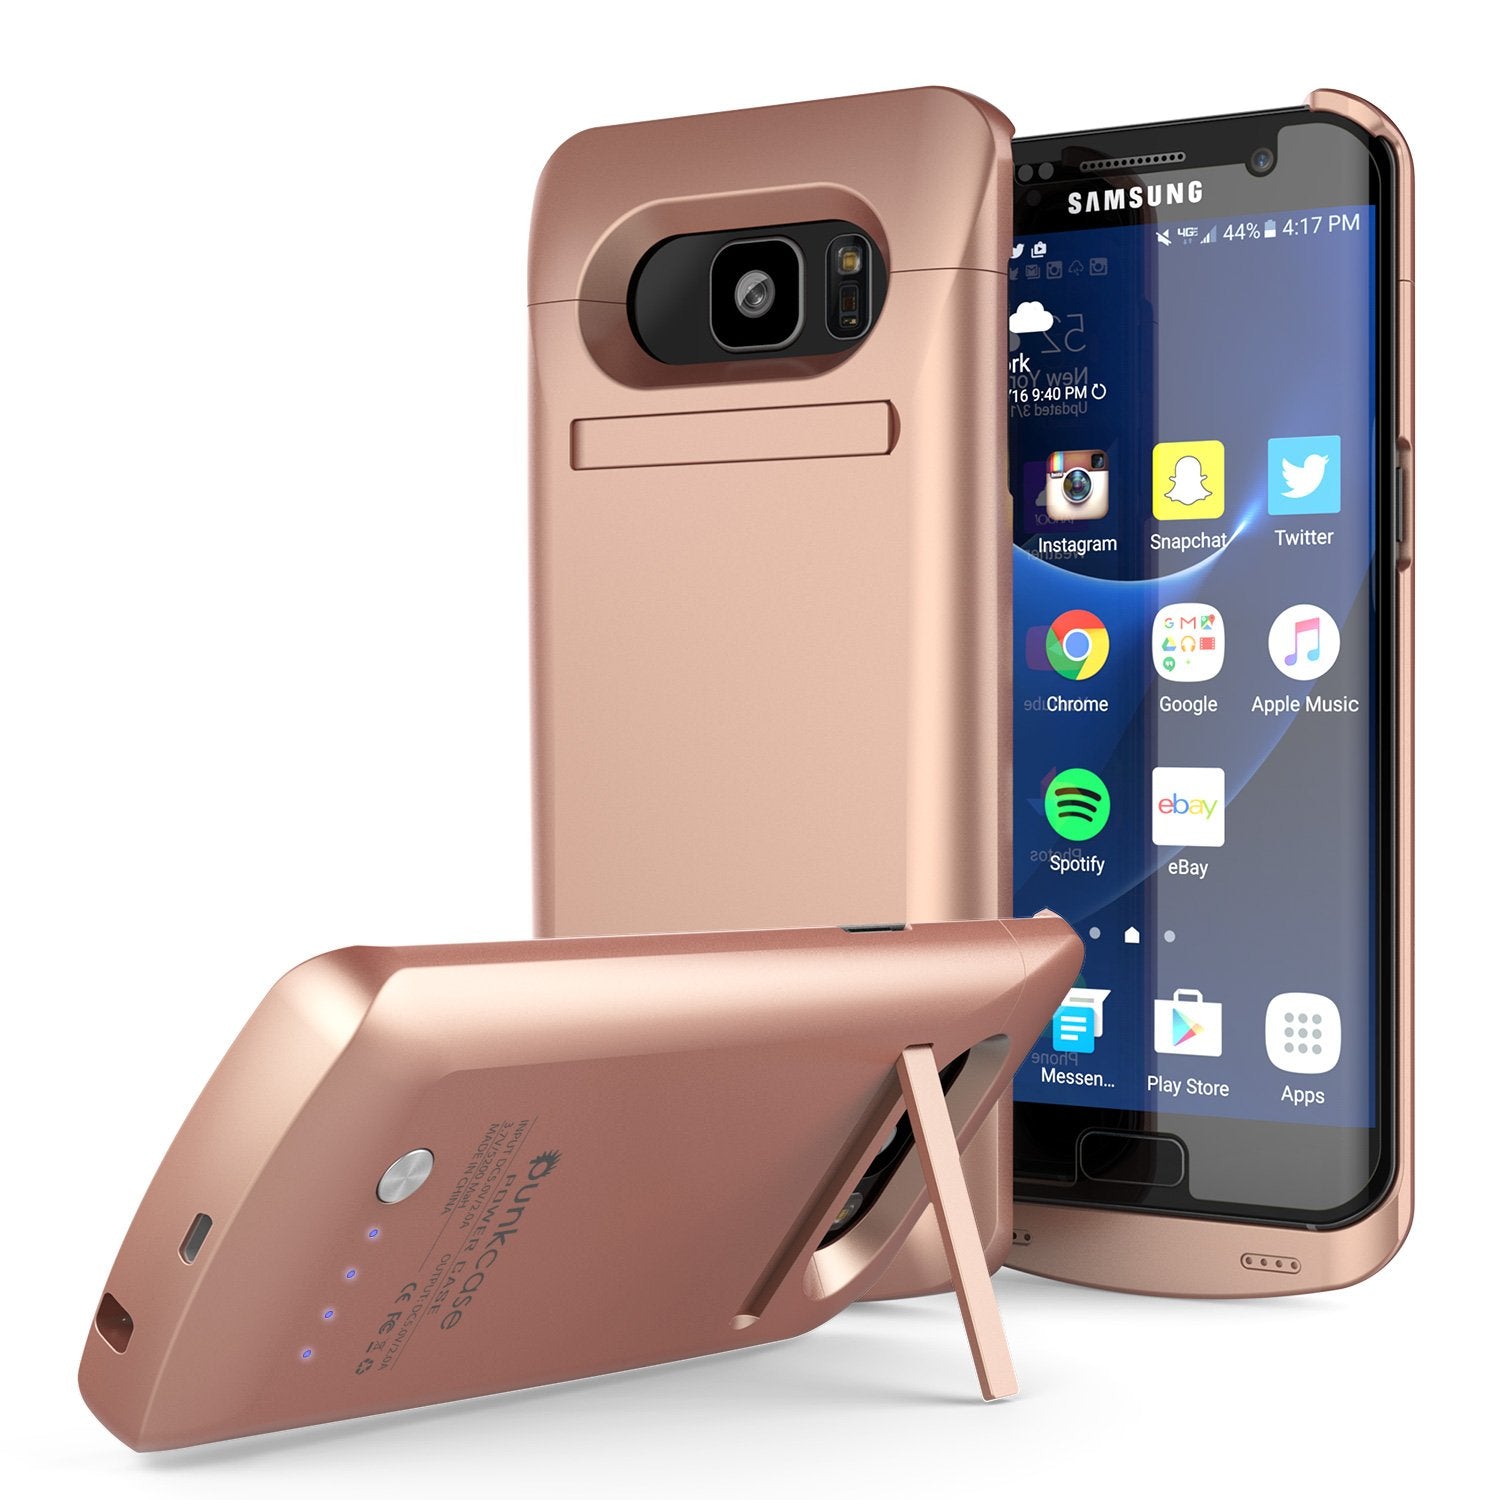 Galaxy S7 EDGE Battery Case, Punkcase 5200mAH Charger Case W/ Screen Protector | Integrated Kickstand & USB Port | IntelSwitch [Rose Gold]